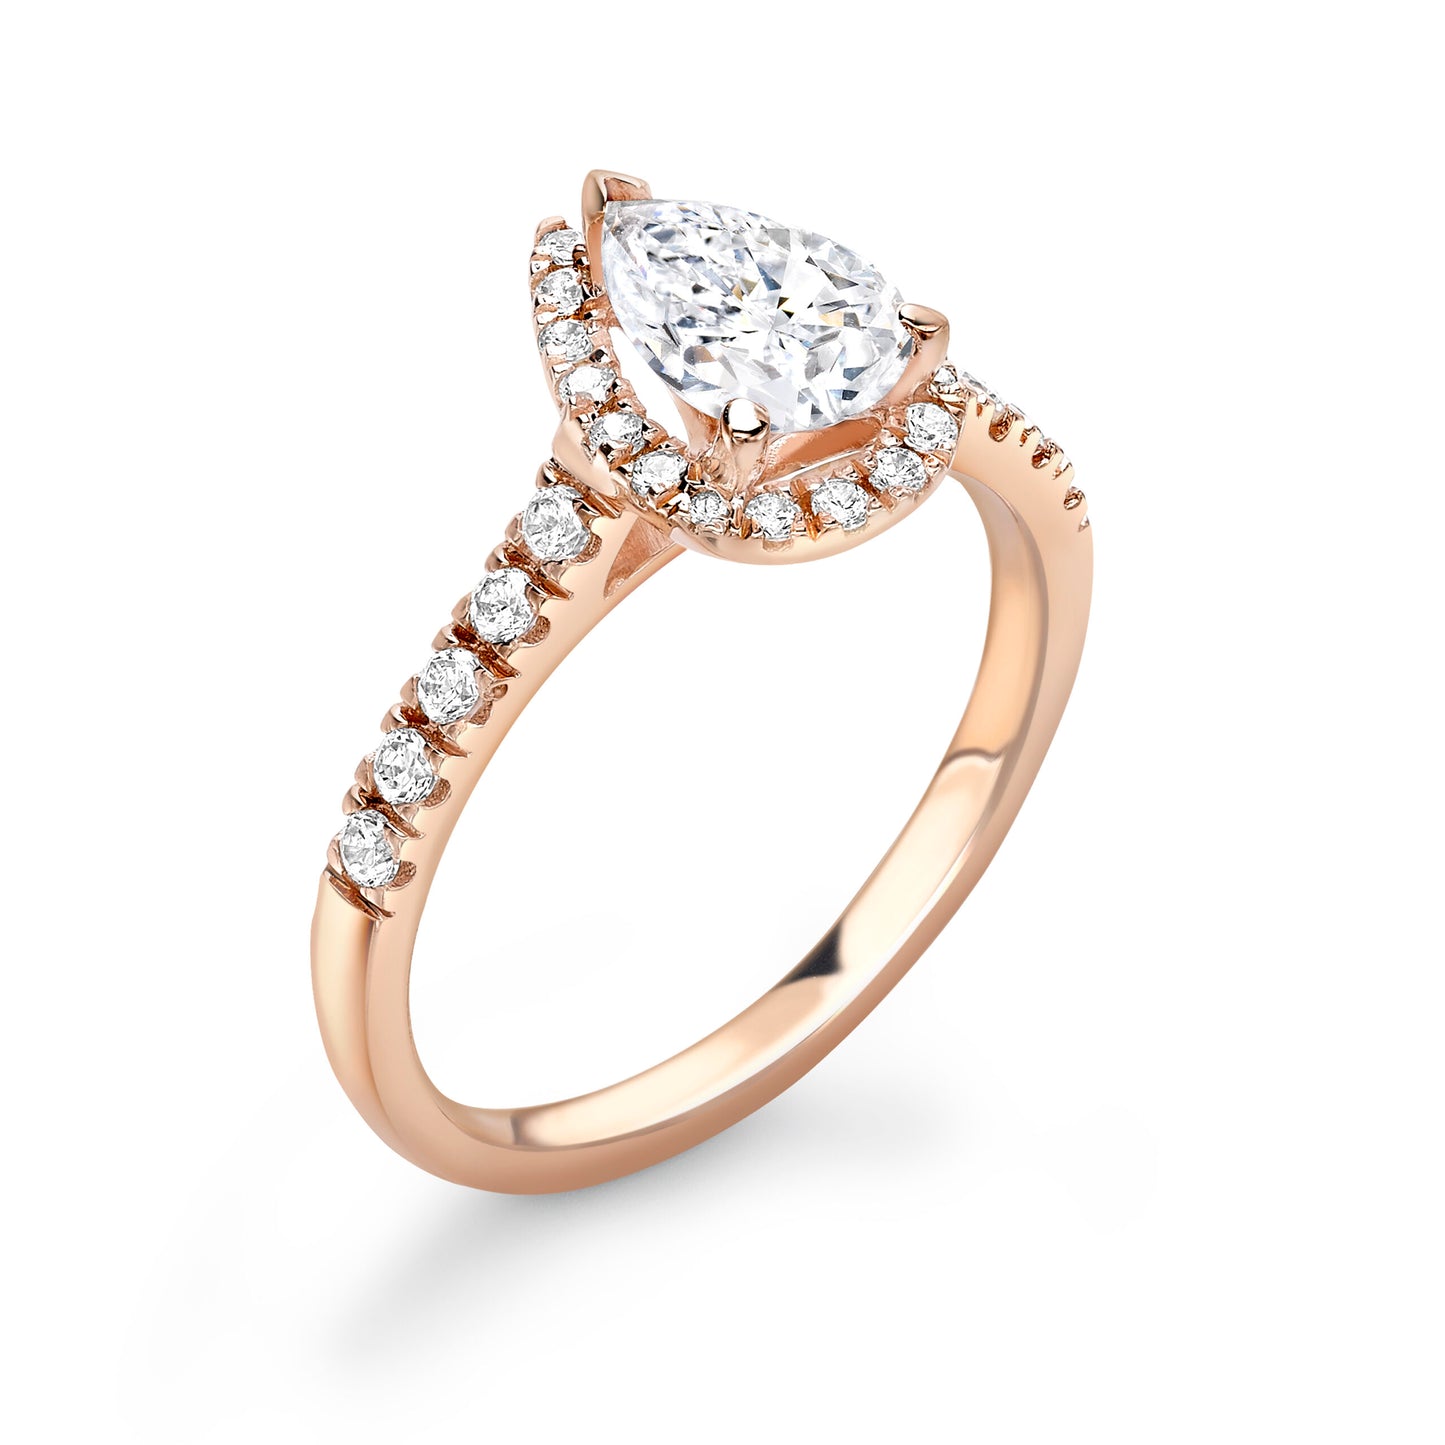 Pear Cut Diamond Ring with Shoulder Stones